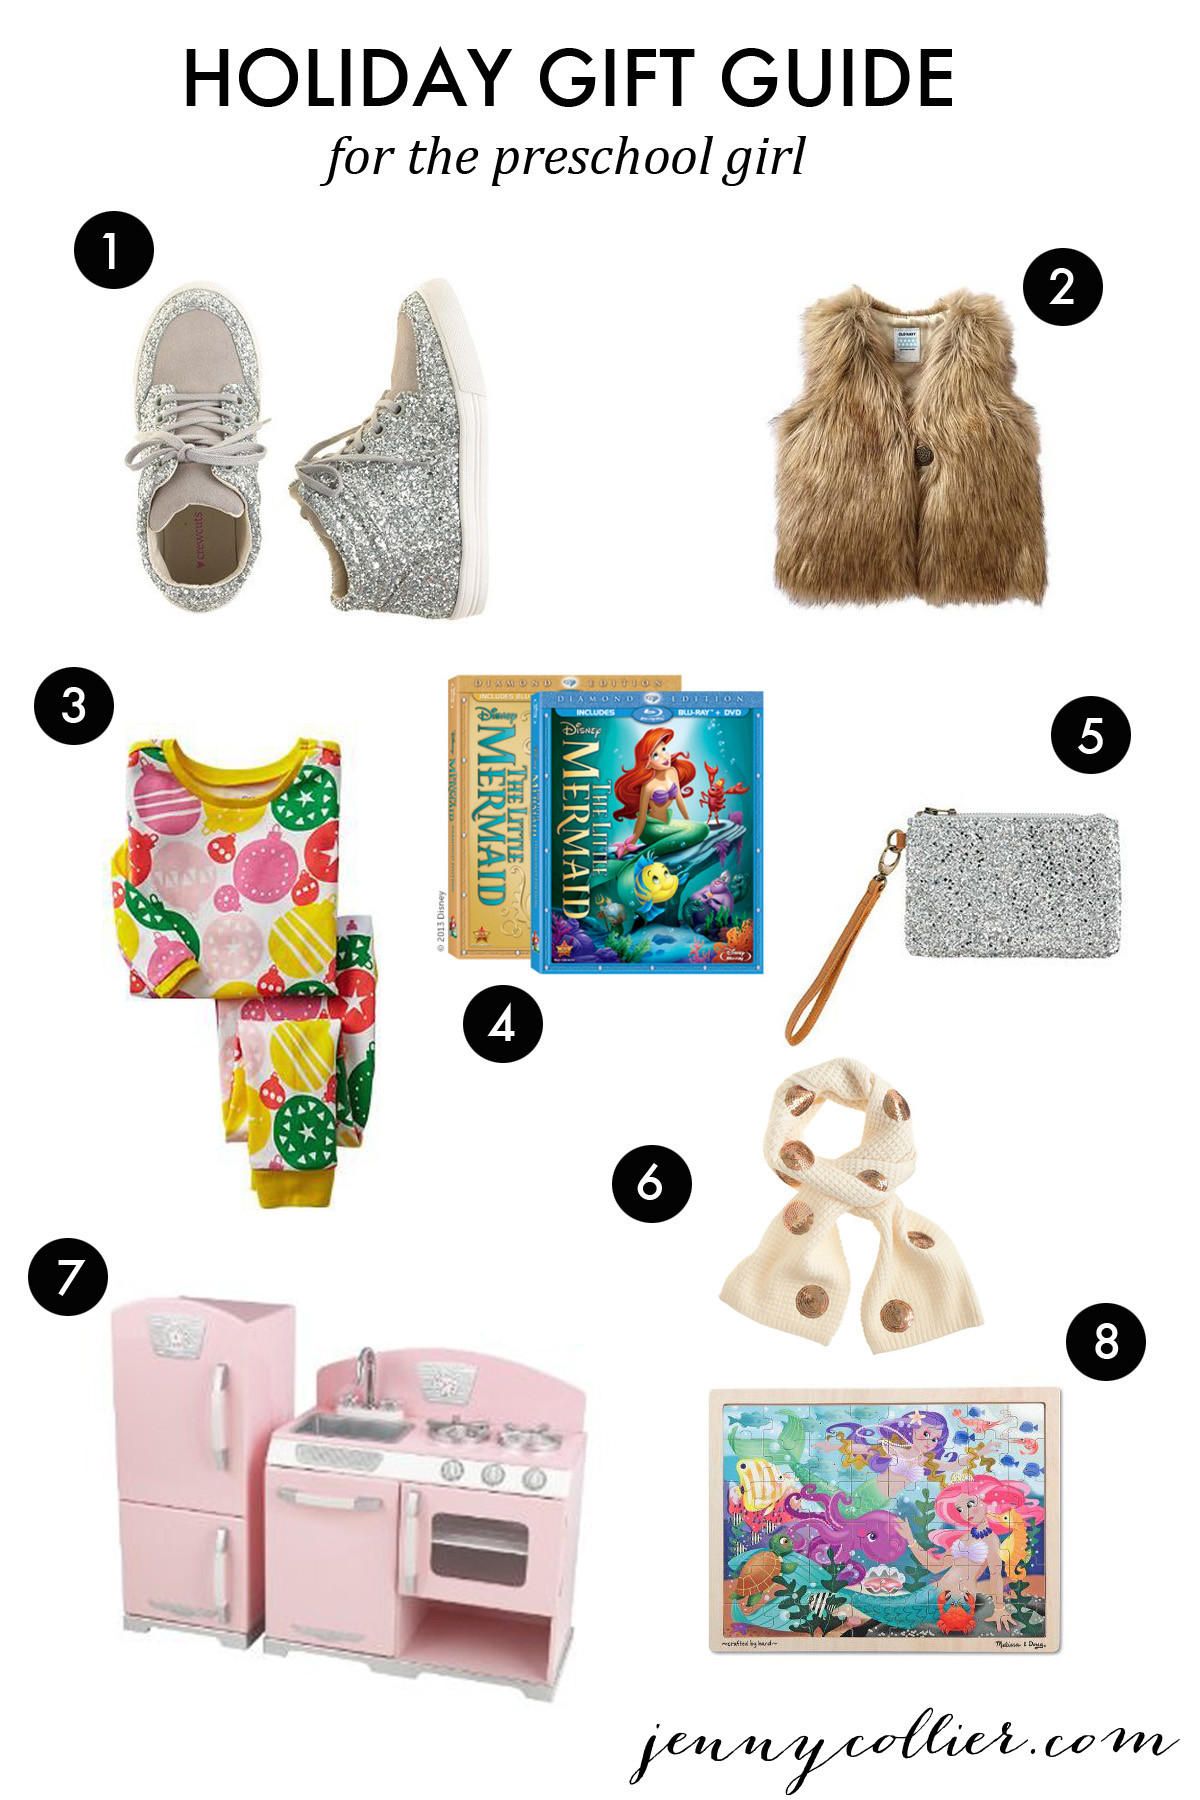 Girls Gift Ideas
 Holiday Gift Ideas for Girls jenny collier blog